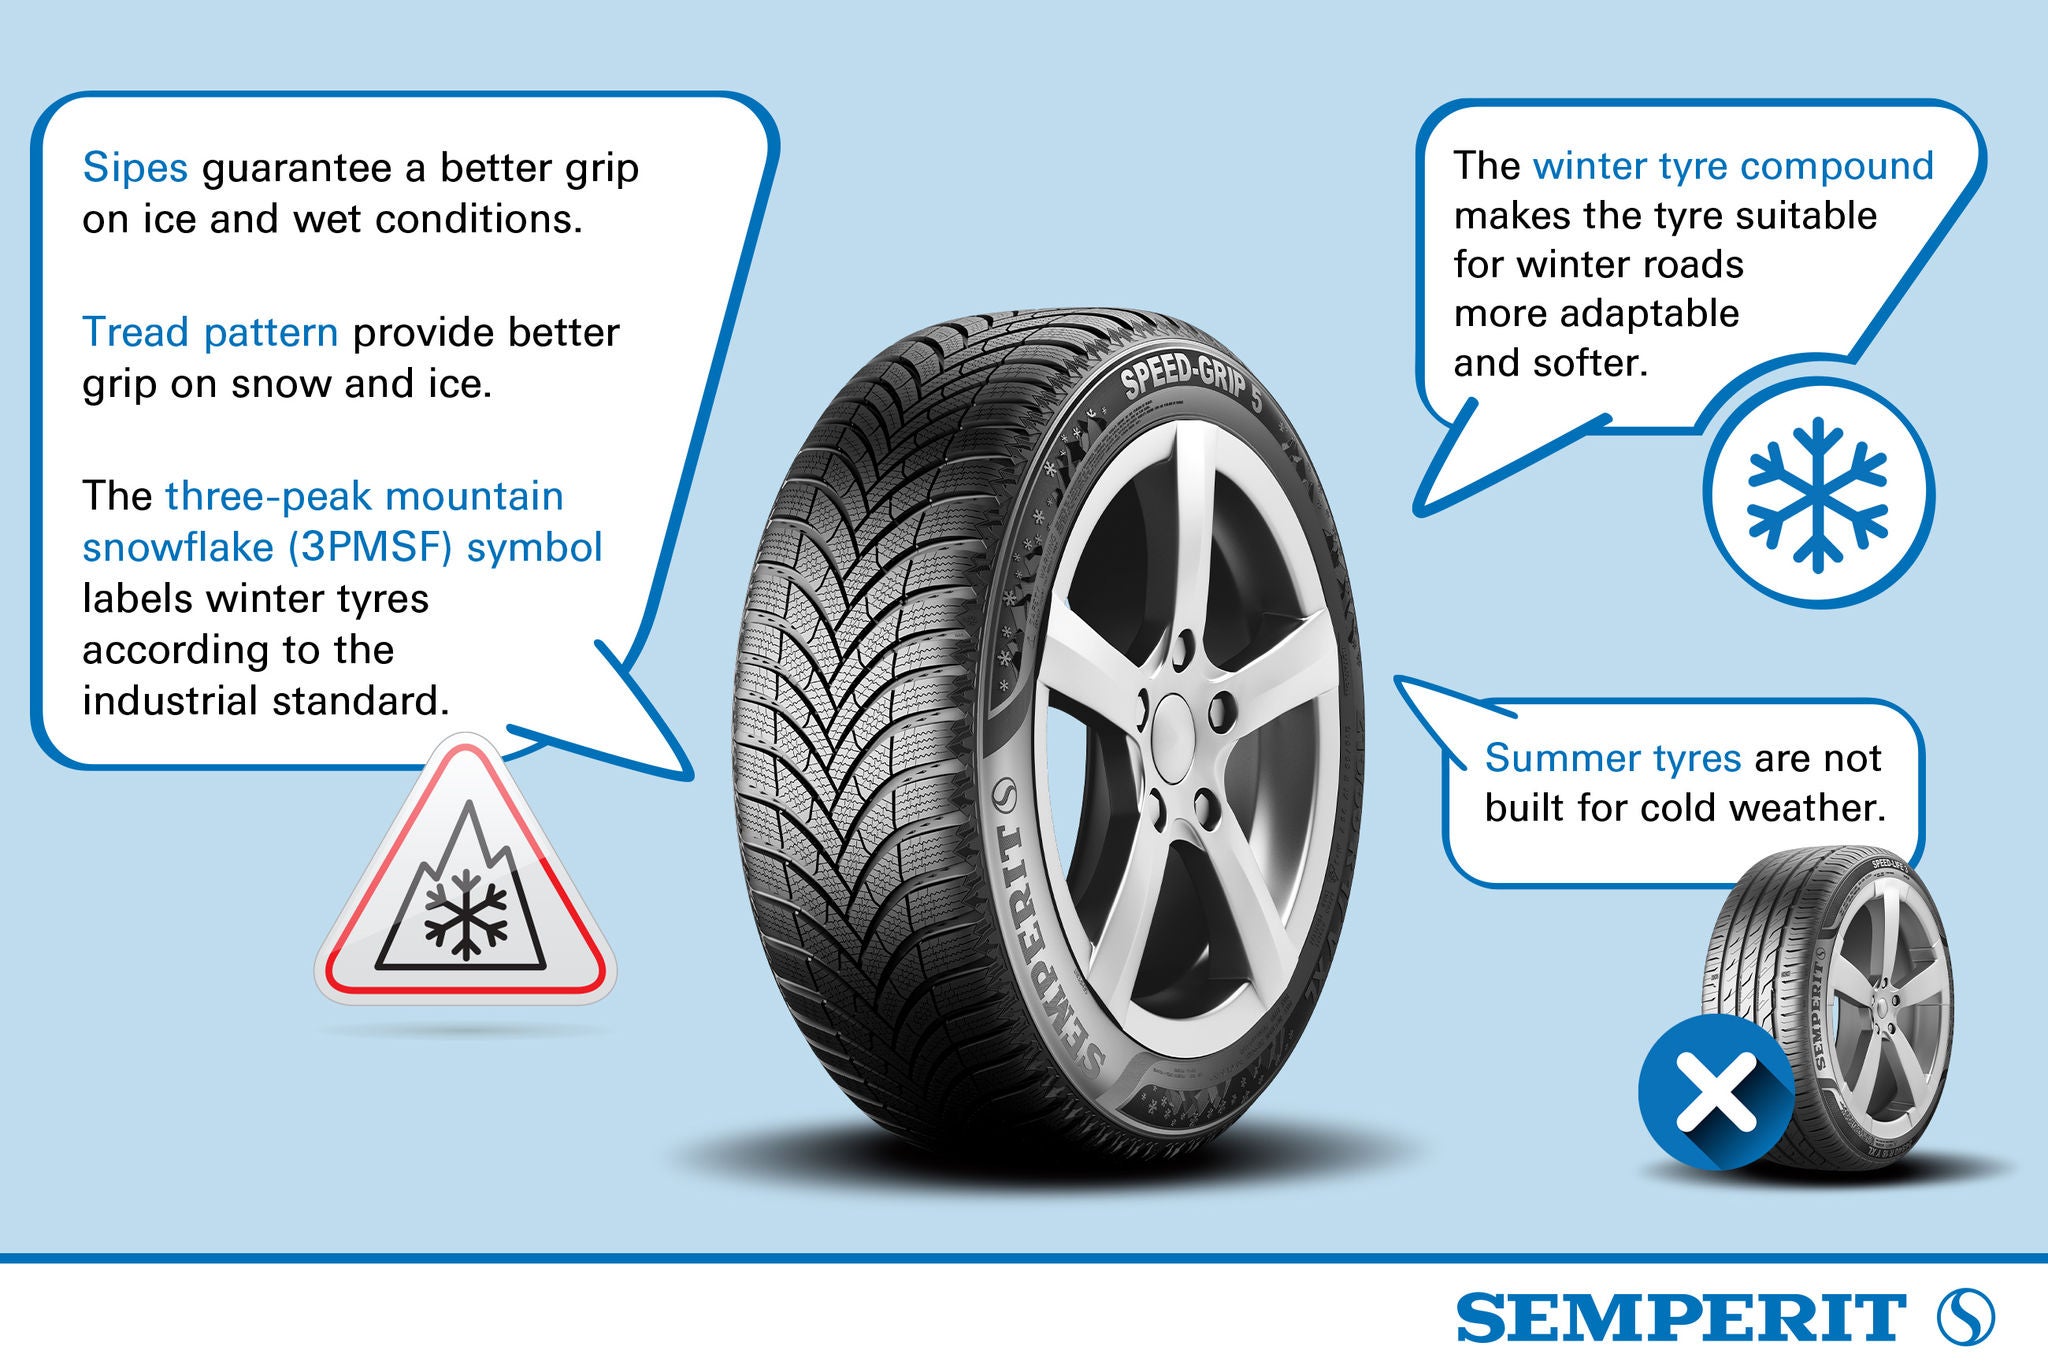 Learn more what makes a good winter tyre